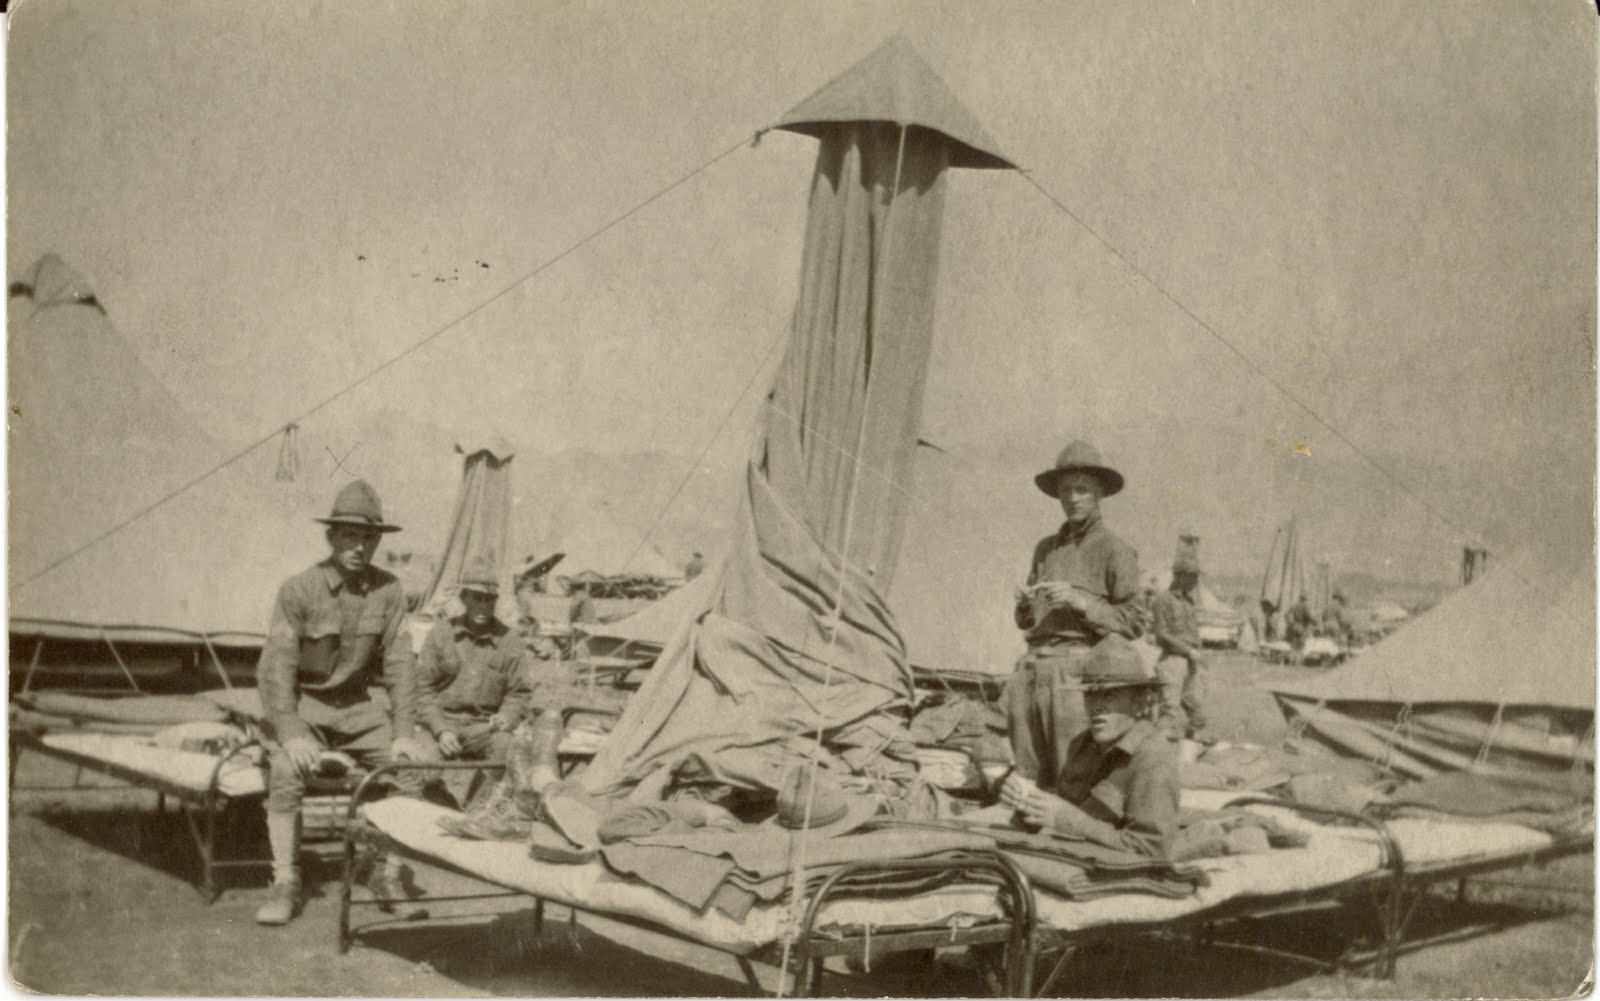 Us soldiers at Fort Douglas, Utah, in 1917. The tents could open and close quickly, hence the design.